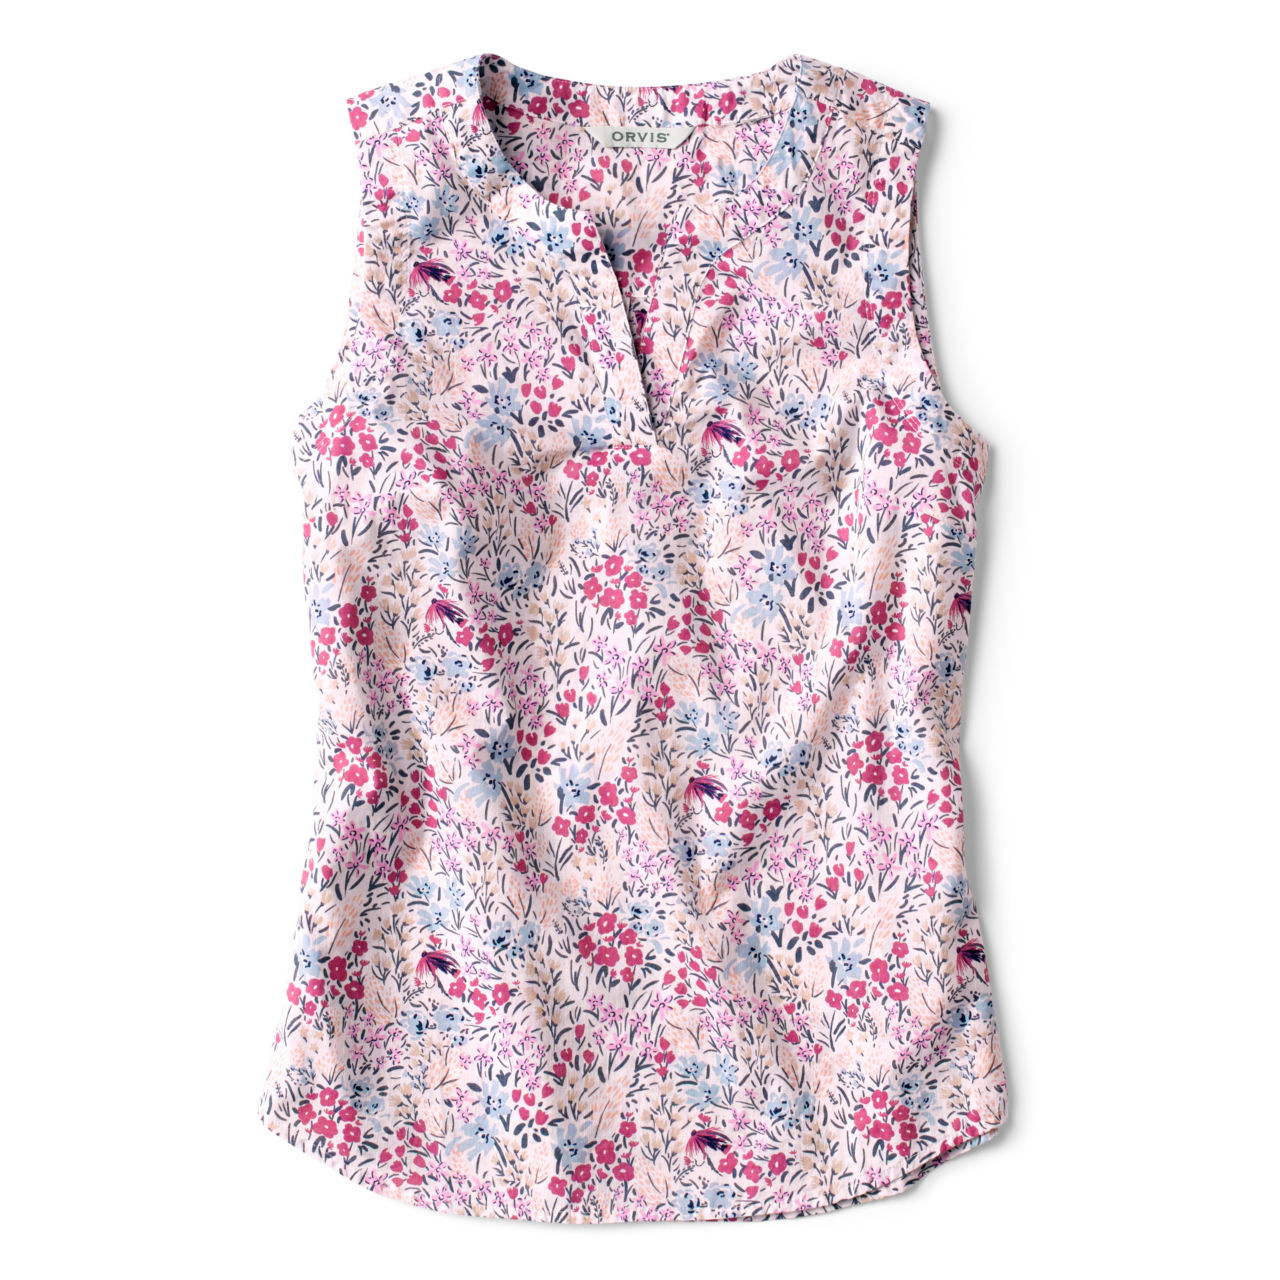 Easy Sleeveless Printed Camp Shirt - PUNCH ARTIST FLORAL image number 0